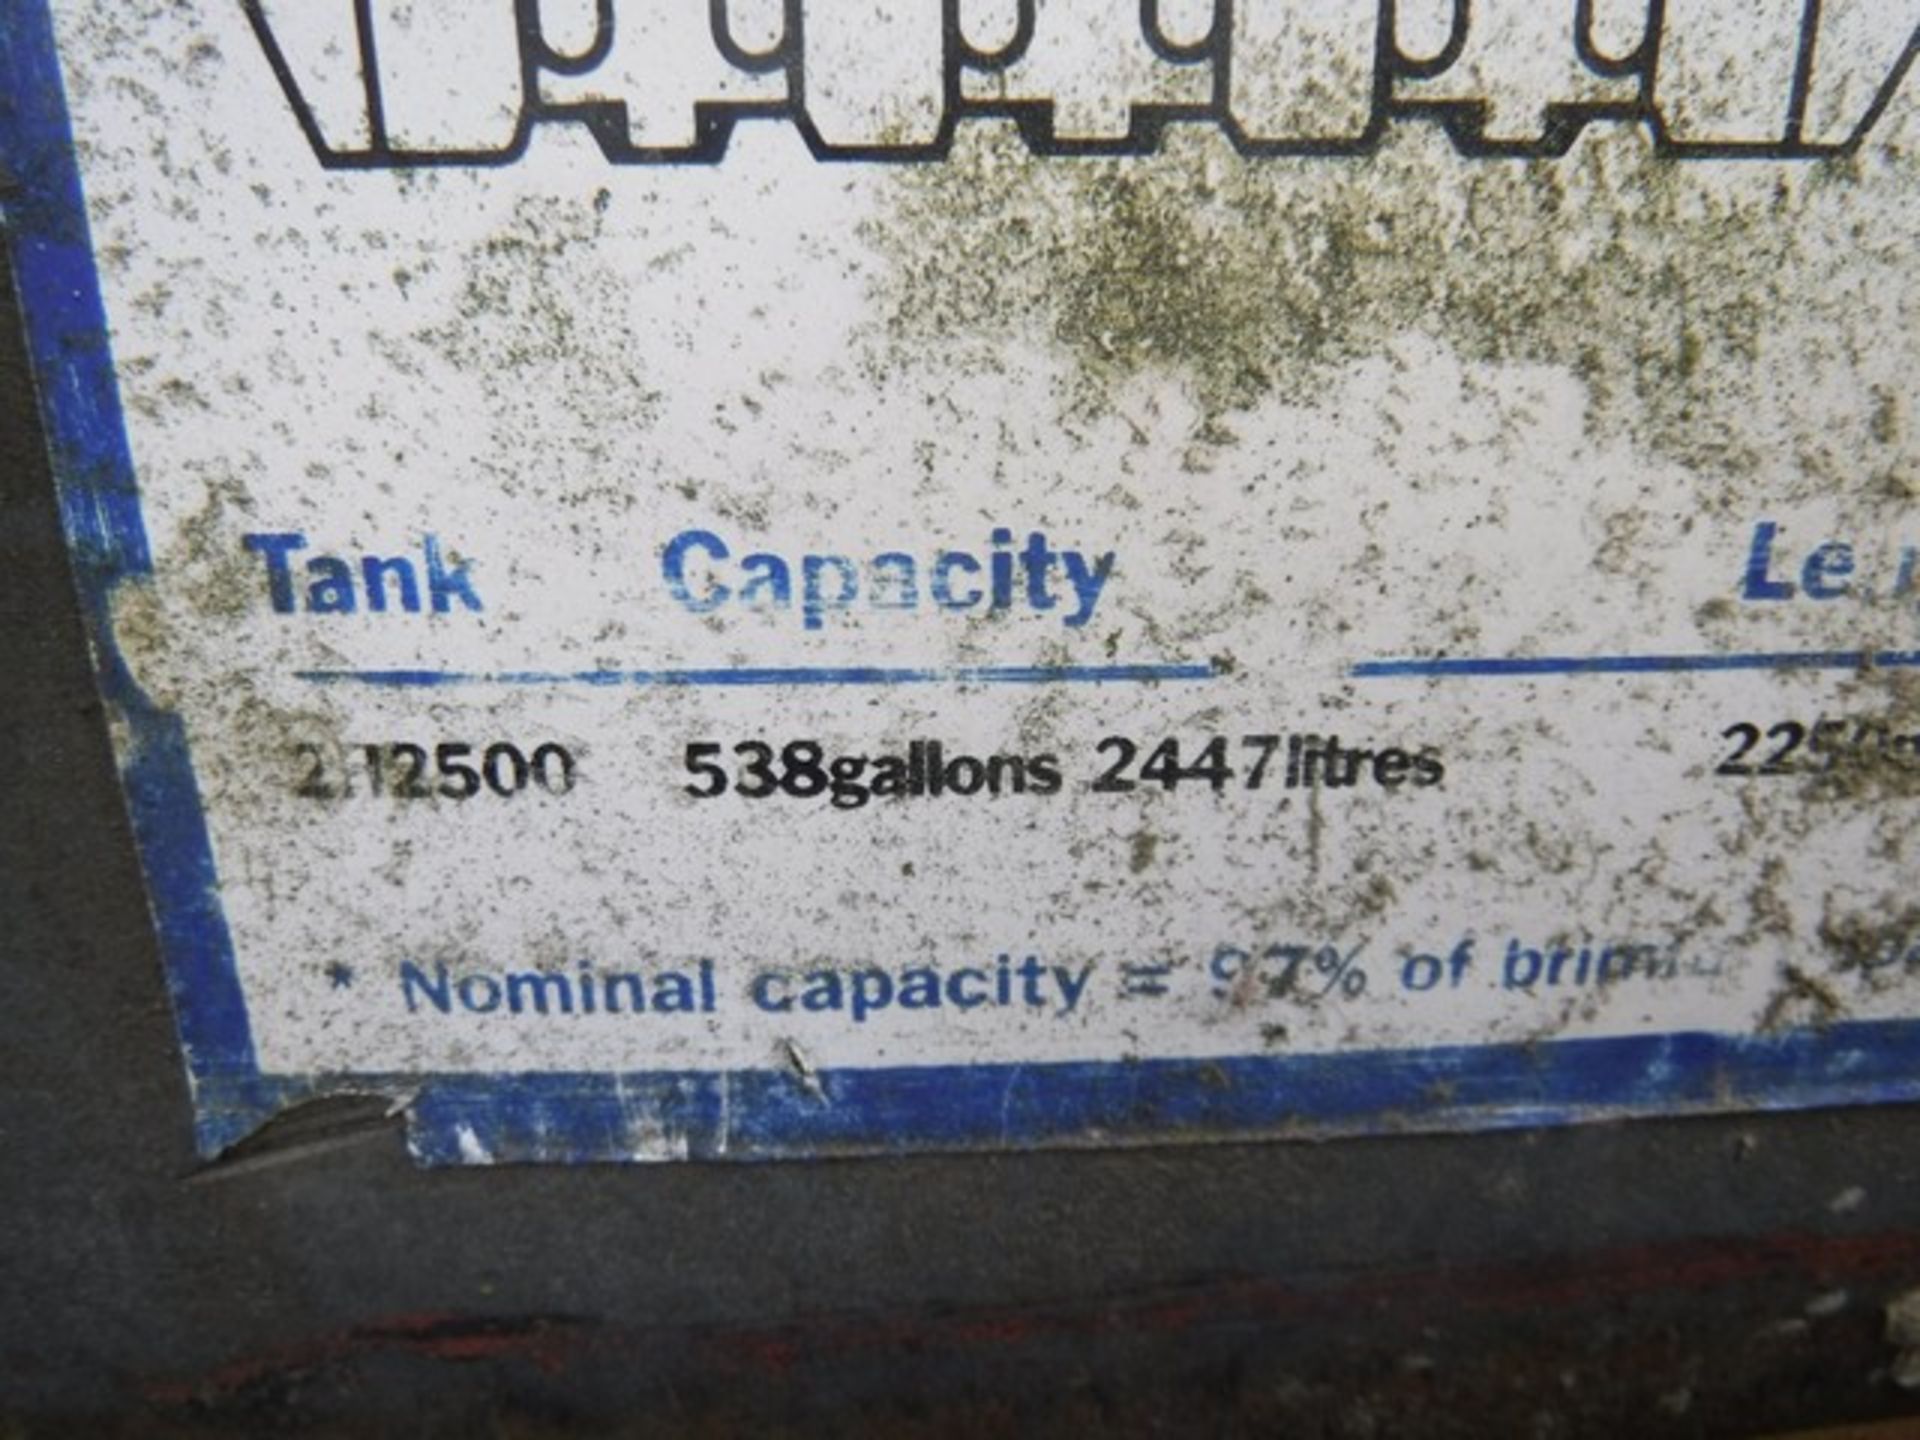 LARGE TITAN OIL TANK, 2H12500, 538 GALLONS, 2447LTRS, L - 2250, W - 1265, H - 1320 - Image 2 of 3